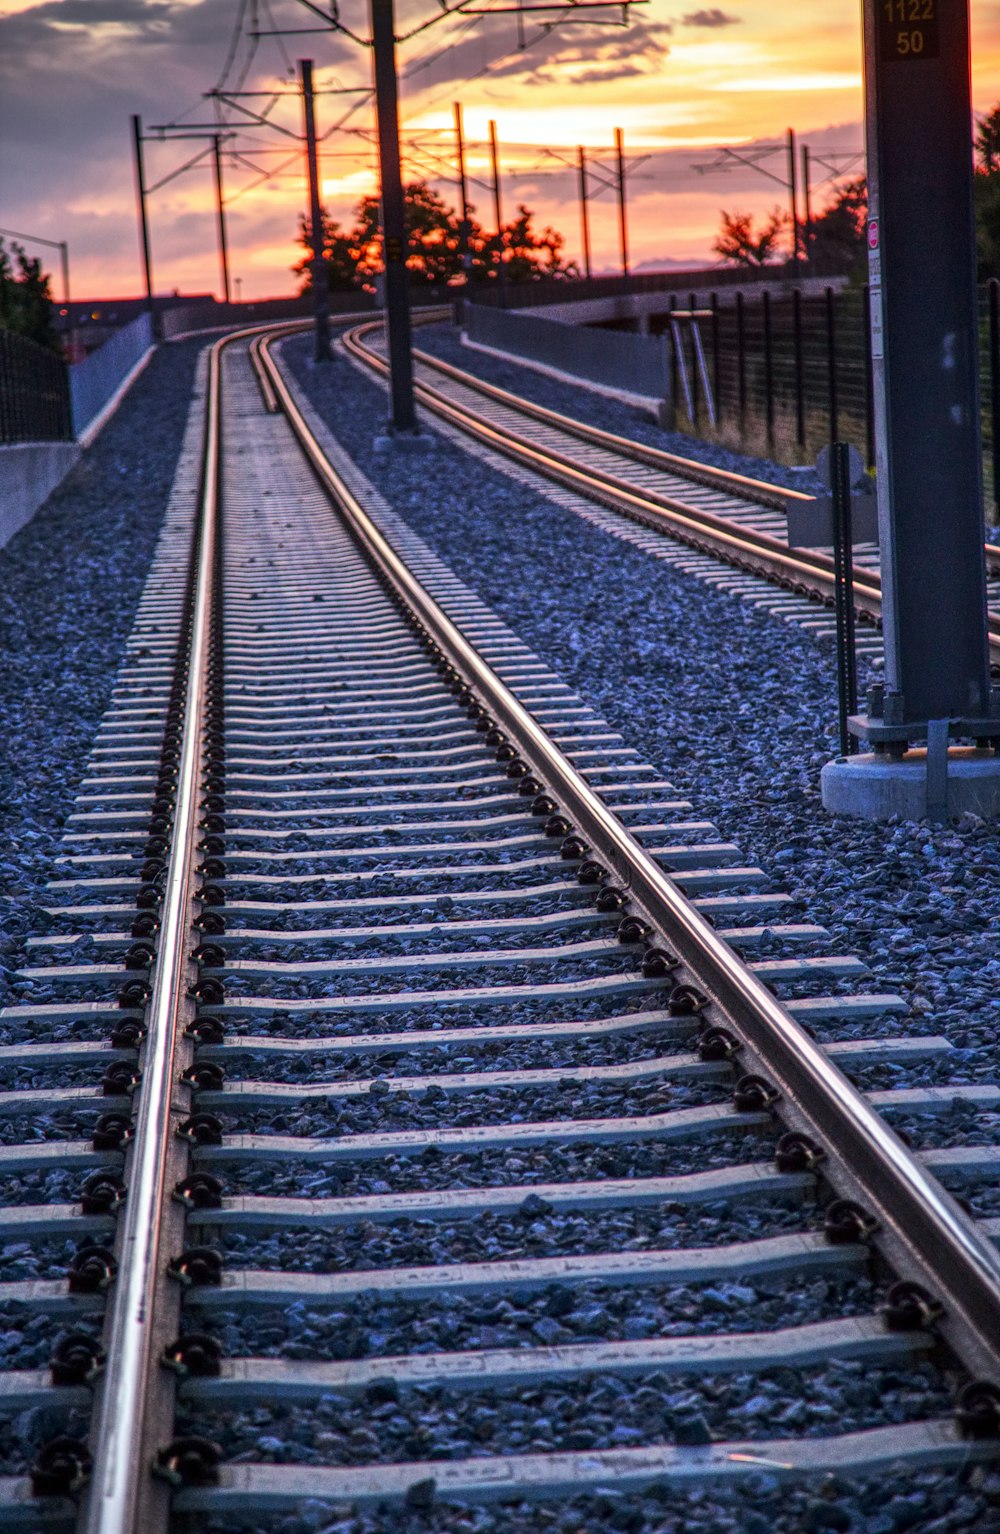 a train track with a sunset in the background